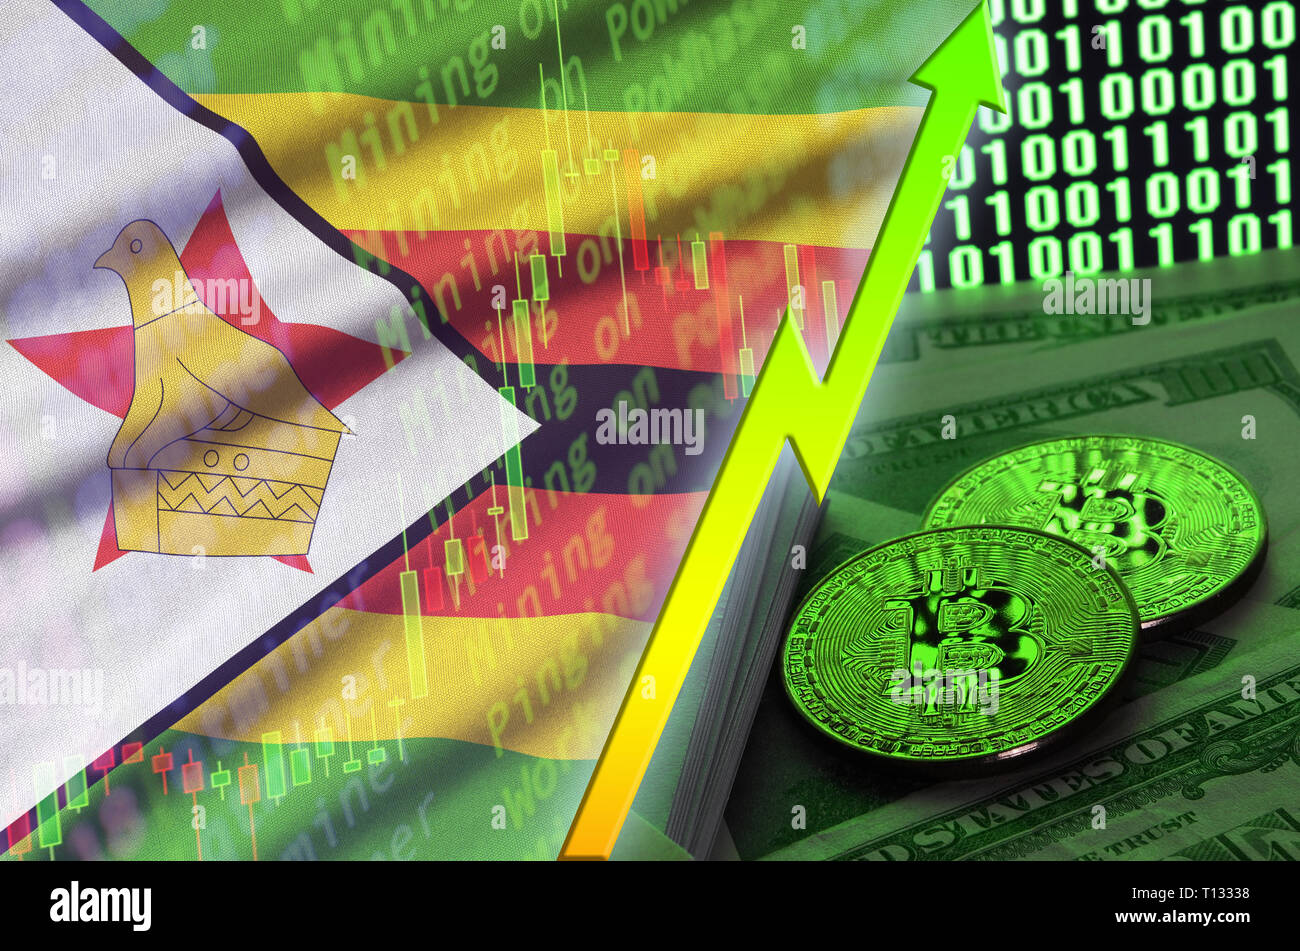 Zimbabwe Flag And Cryptocurrency Growing Trend With Two Bitcoins On - 